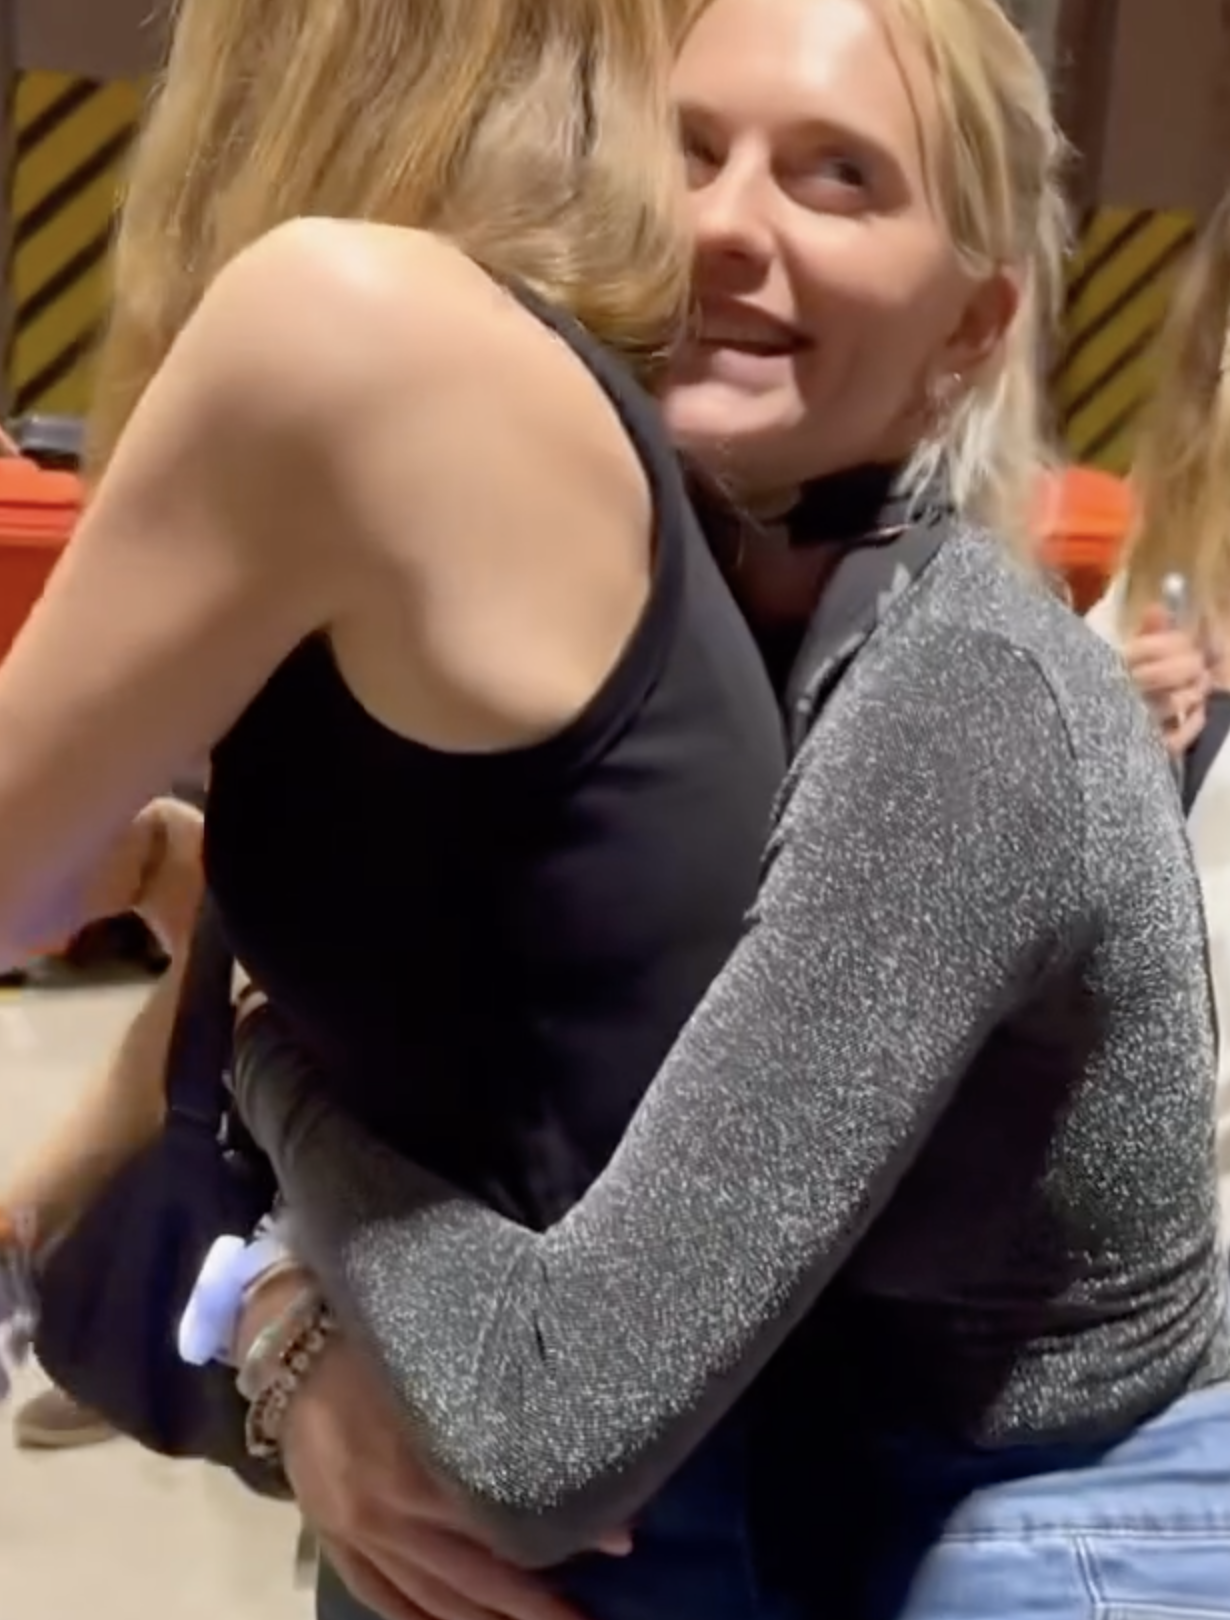 Poppy Delevingne hugging Leslie Mann, one in a sleeveless top and the other in a glittery long-sleeve shirt. Their faces are not fully visible